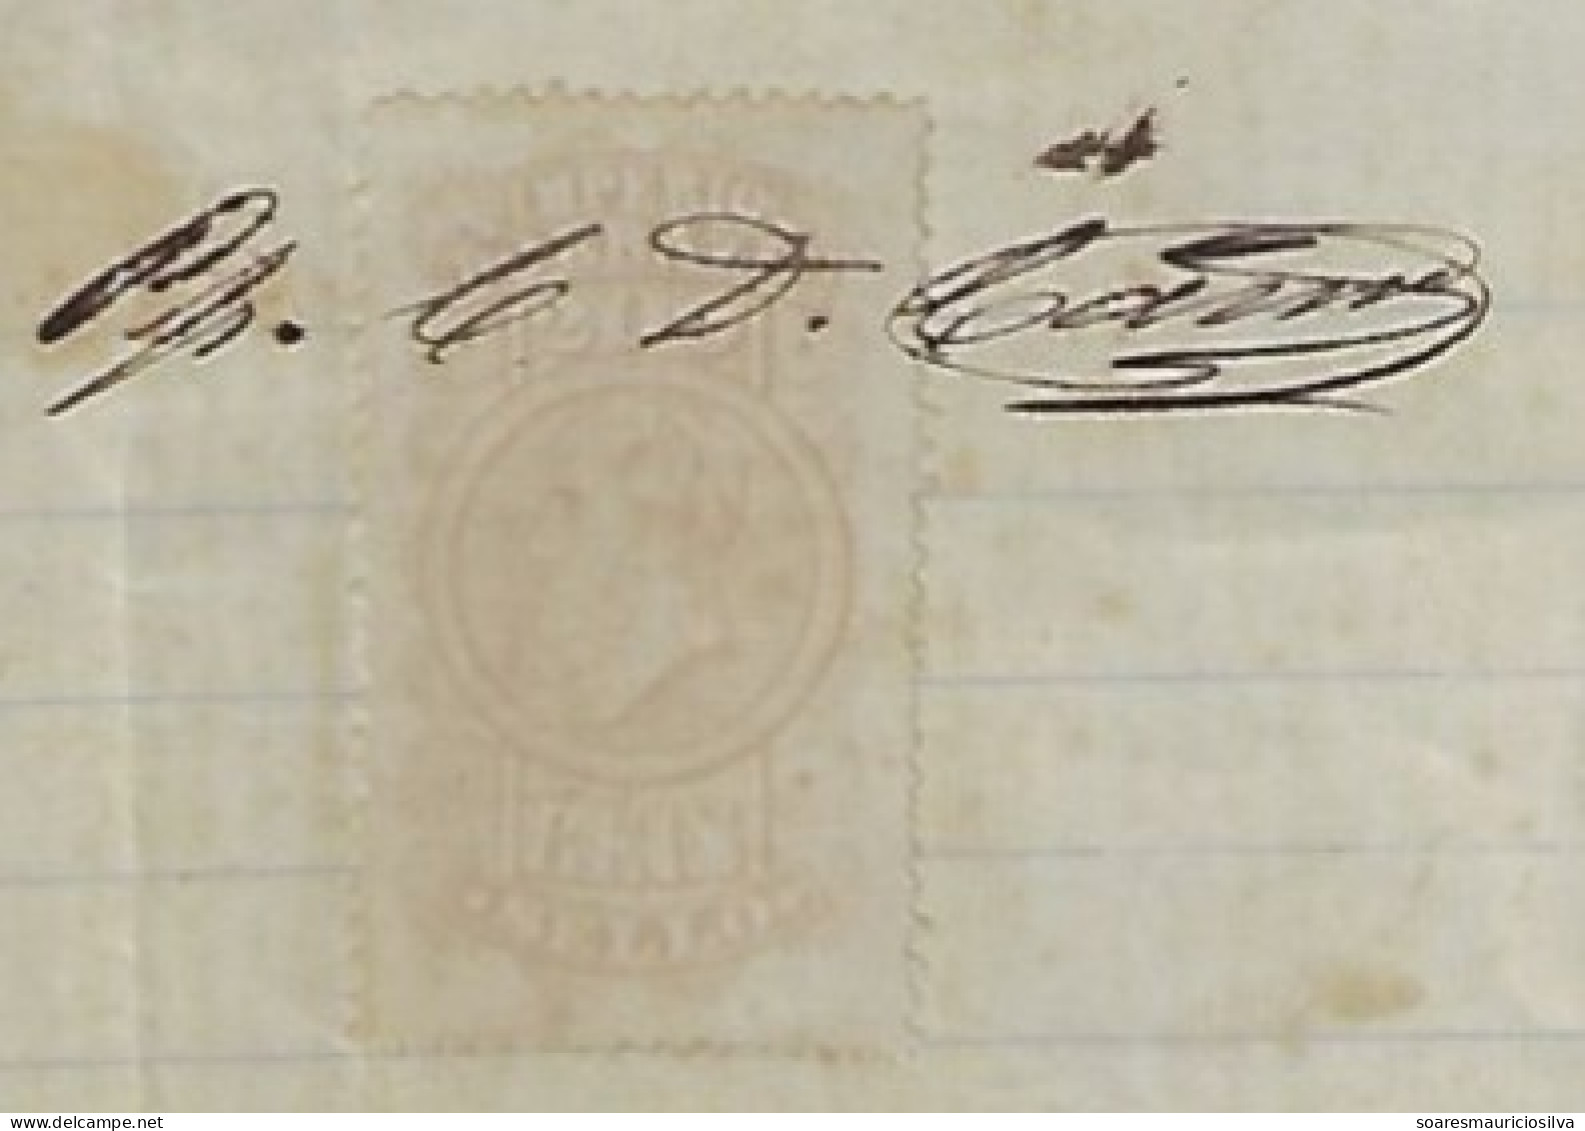 Brazil 1884 Receipt From Dressmaker Idalina Francisca Da Cunha Issued In Campos Tax Stamp Emperor Pedro II 200 Réis - Lettres & Documents